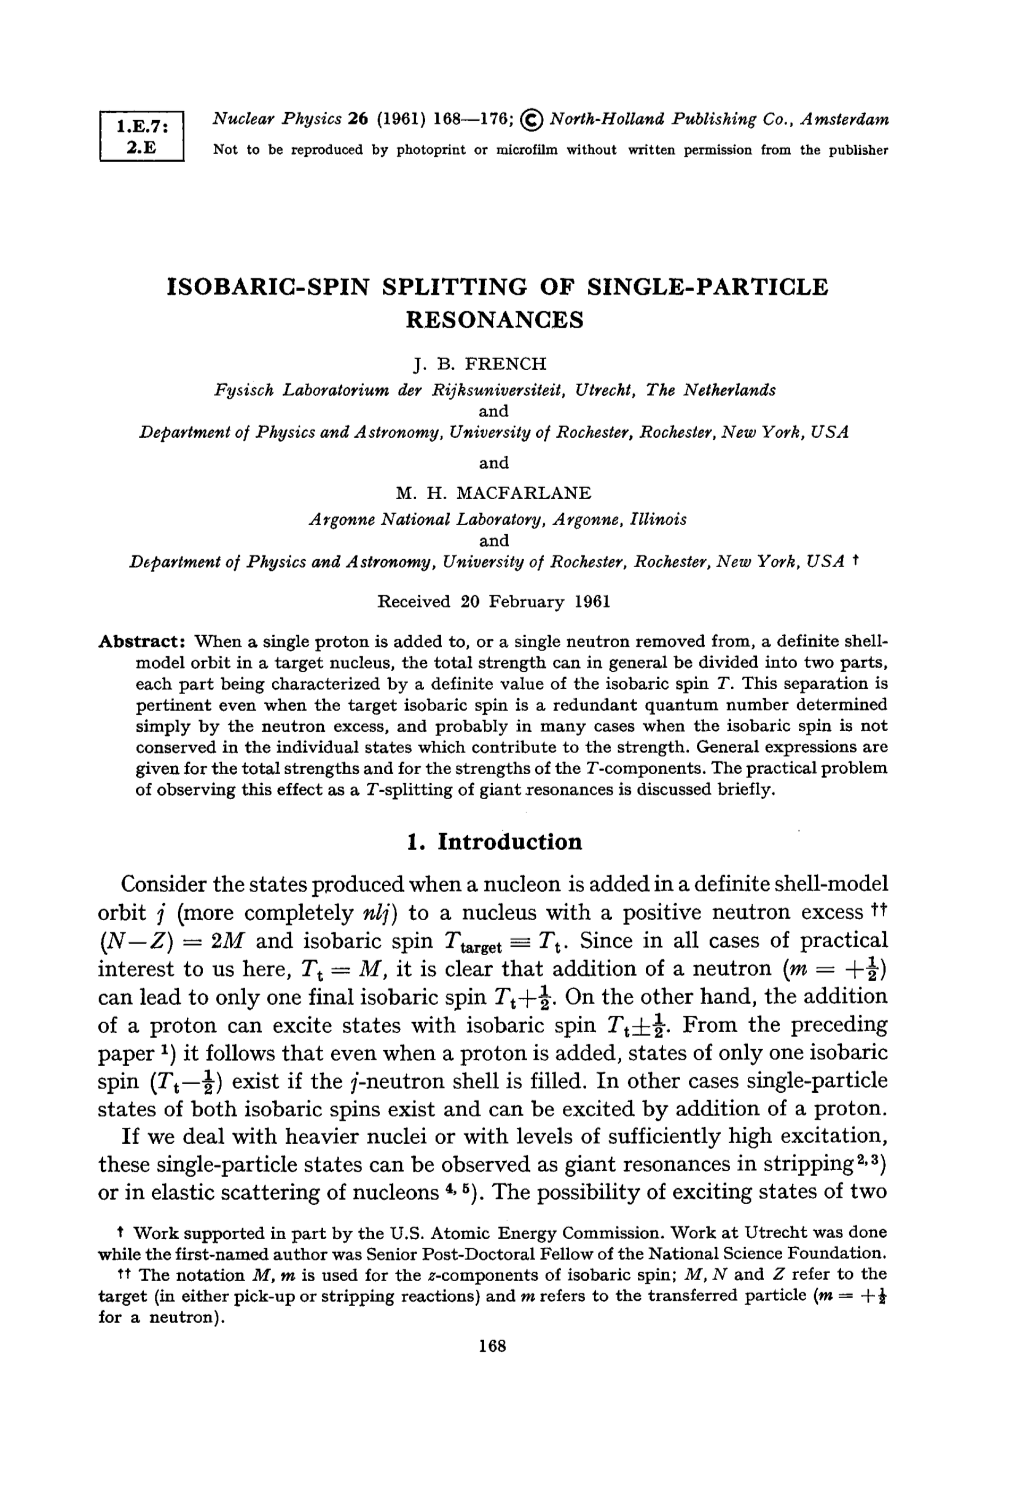 ISOBARIC-SPIN SPLITTING of SINGLE-PARTICLE RESONANCES 1. Introduction Consider the States Produced When a Nucleon Is Added in A